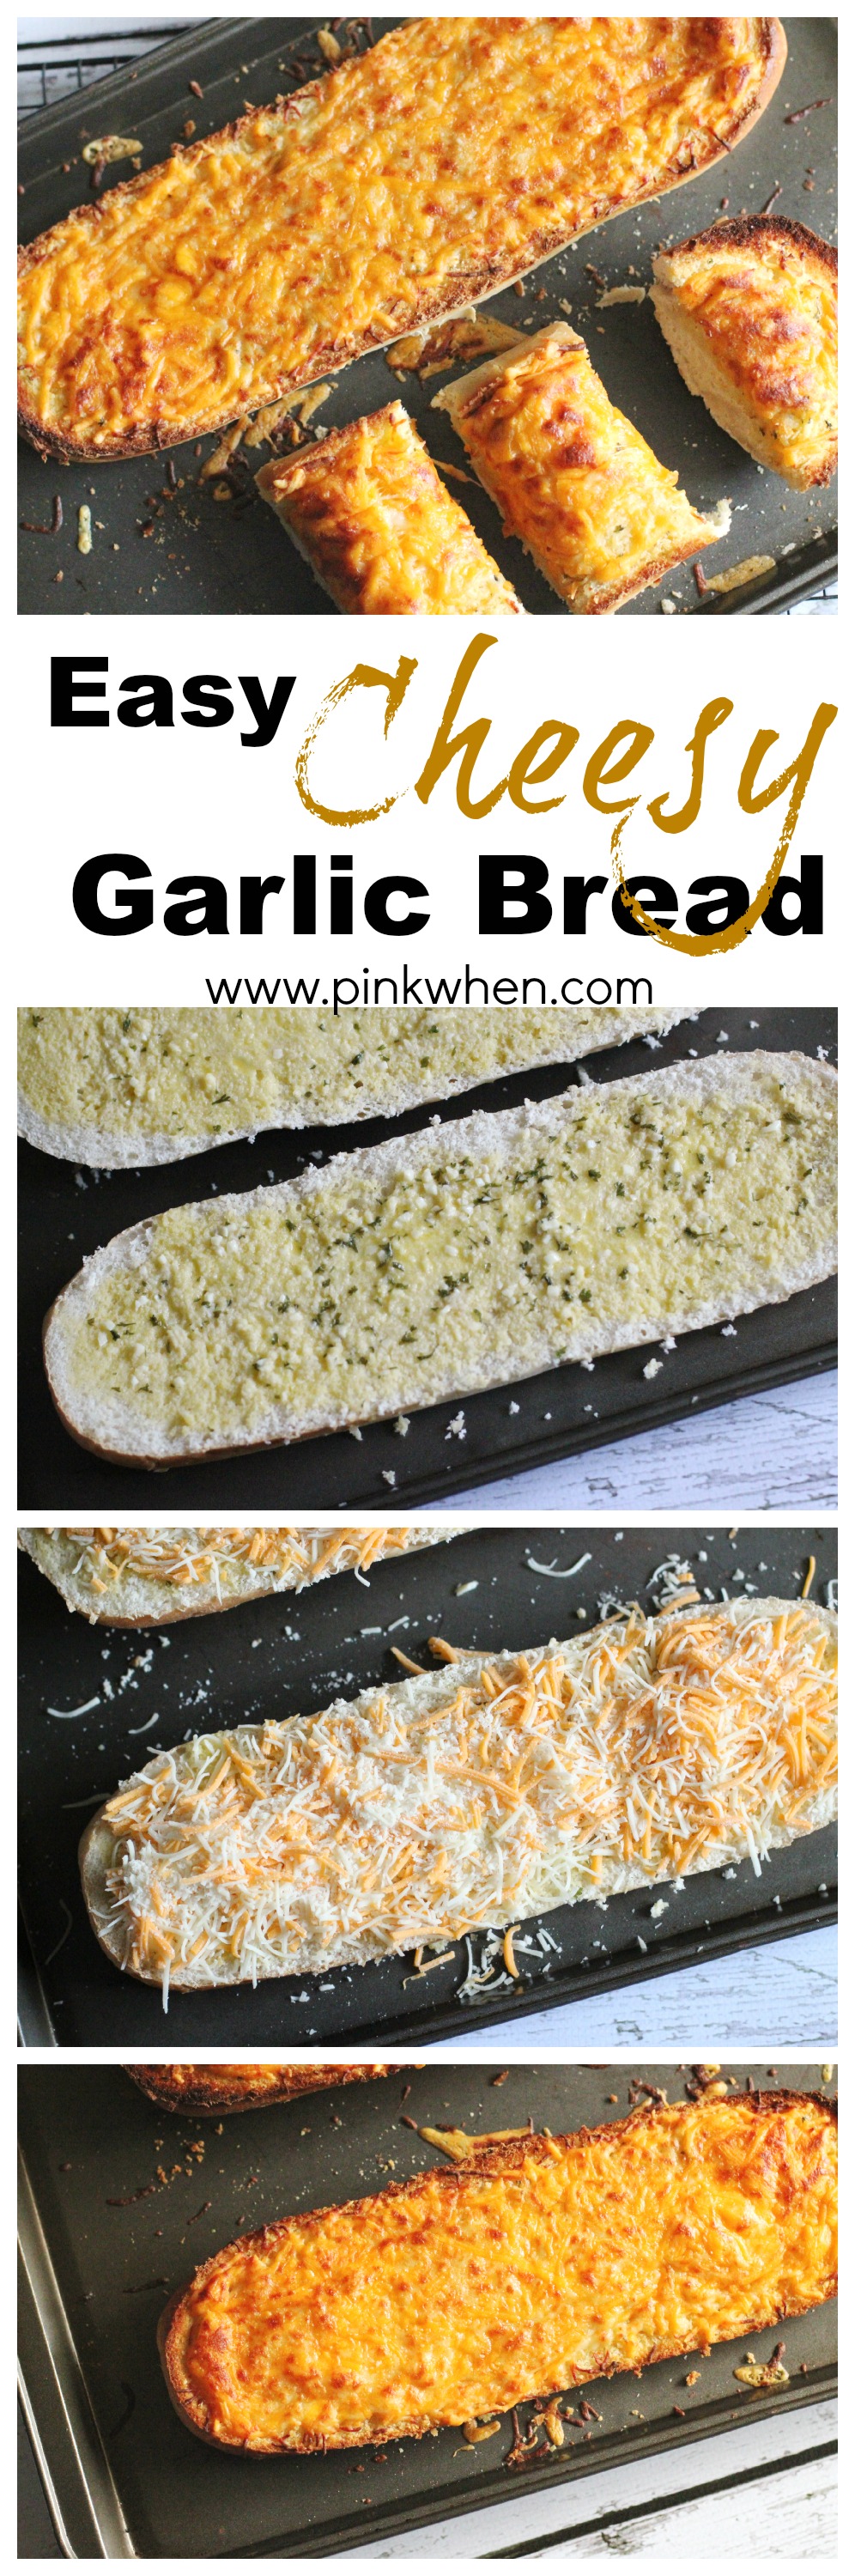 We use 3 kinds of cheeses to turn plain french bread into a piece of delicious cheesy garlic bread. Baked to perfection, it's the perfect addition to any meal. #garlicbread #cheesygarlicbread #cheesybread